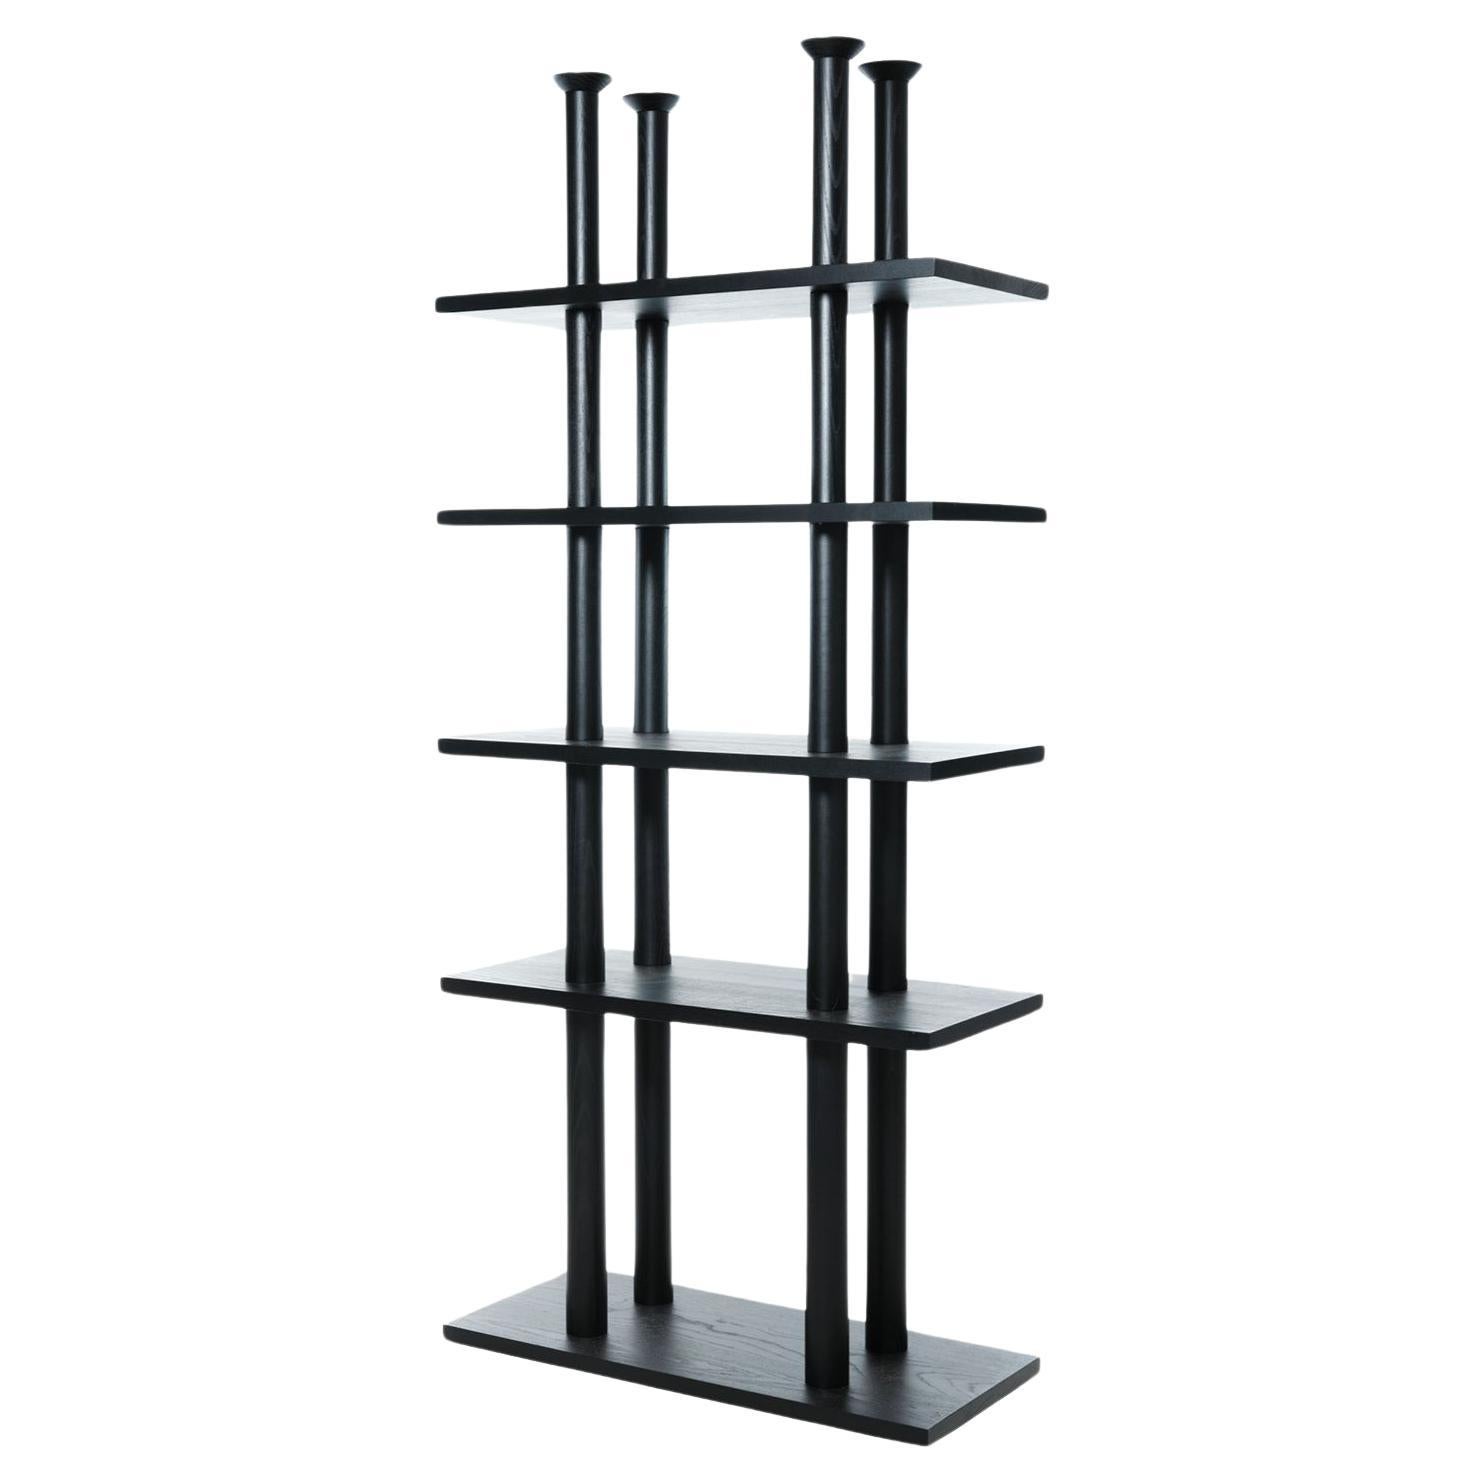 Peristylo Black Wood Shelve by Oscar Tusquets for Bd Barcelona For Sale